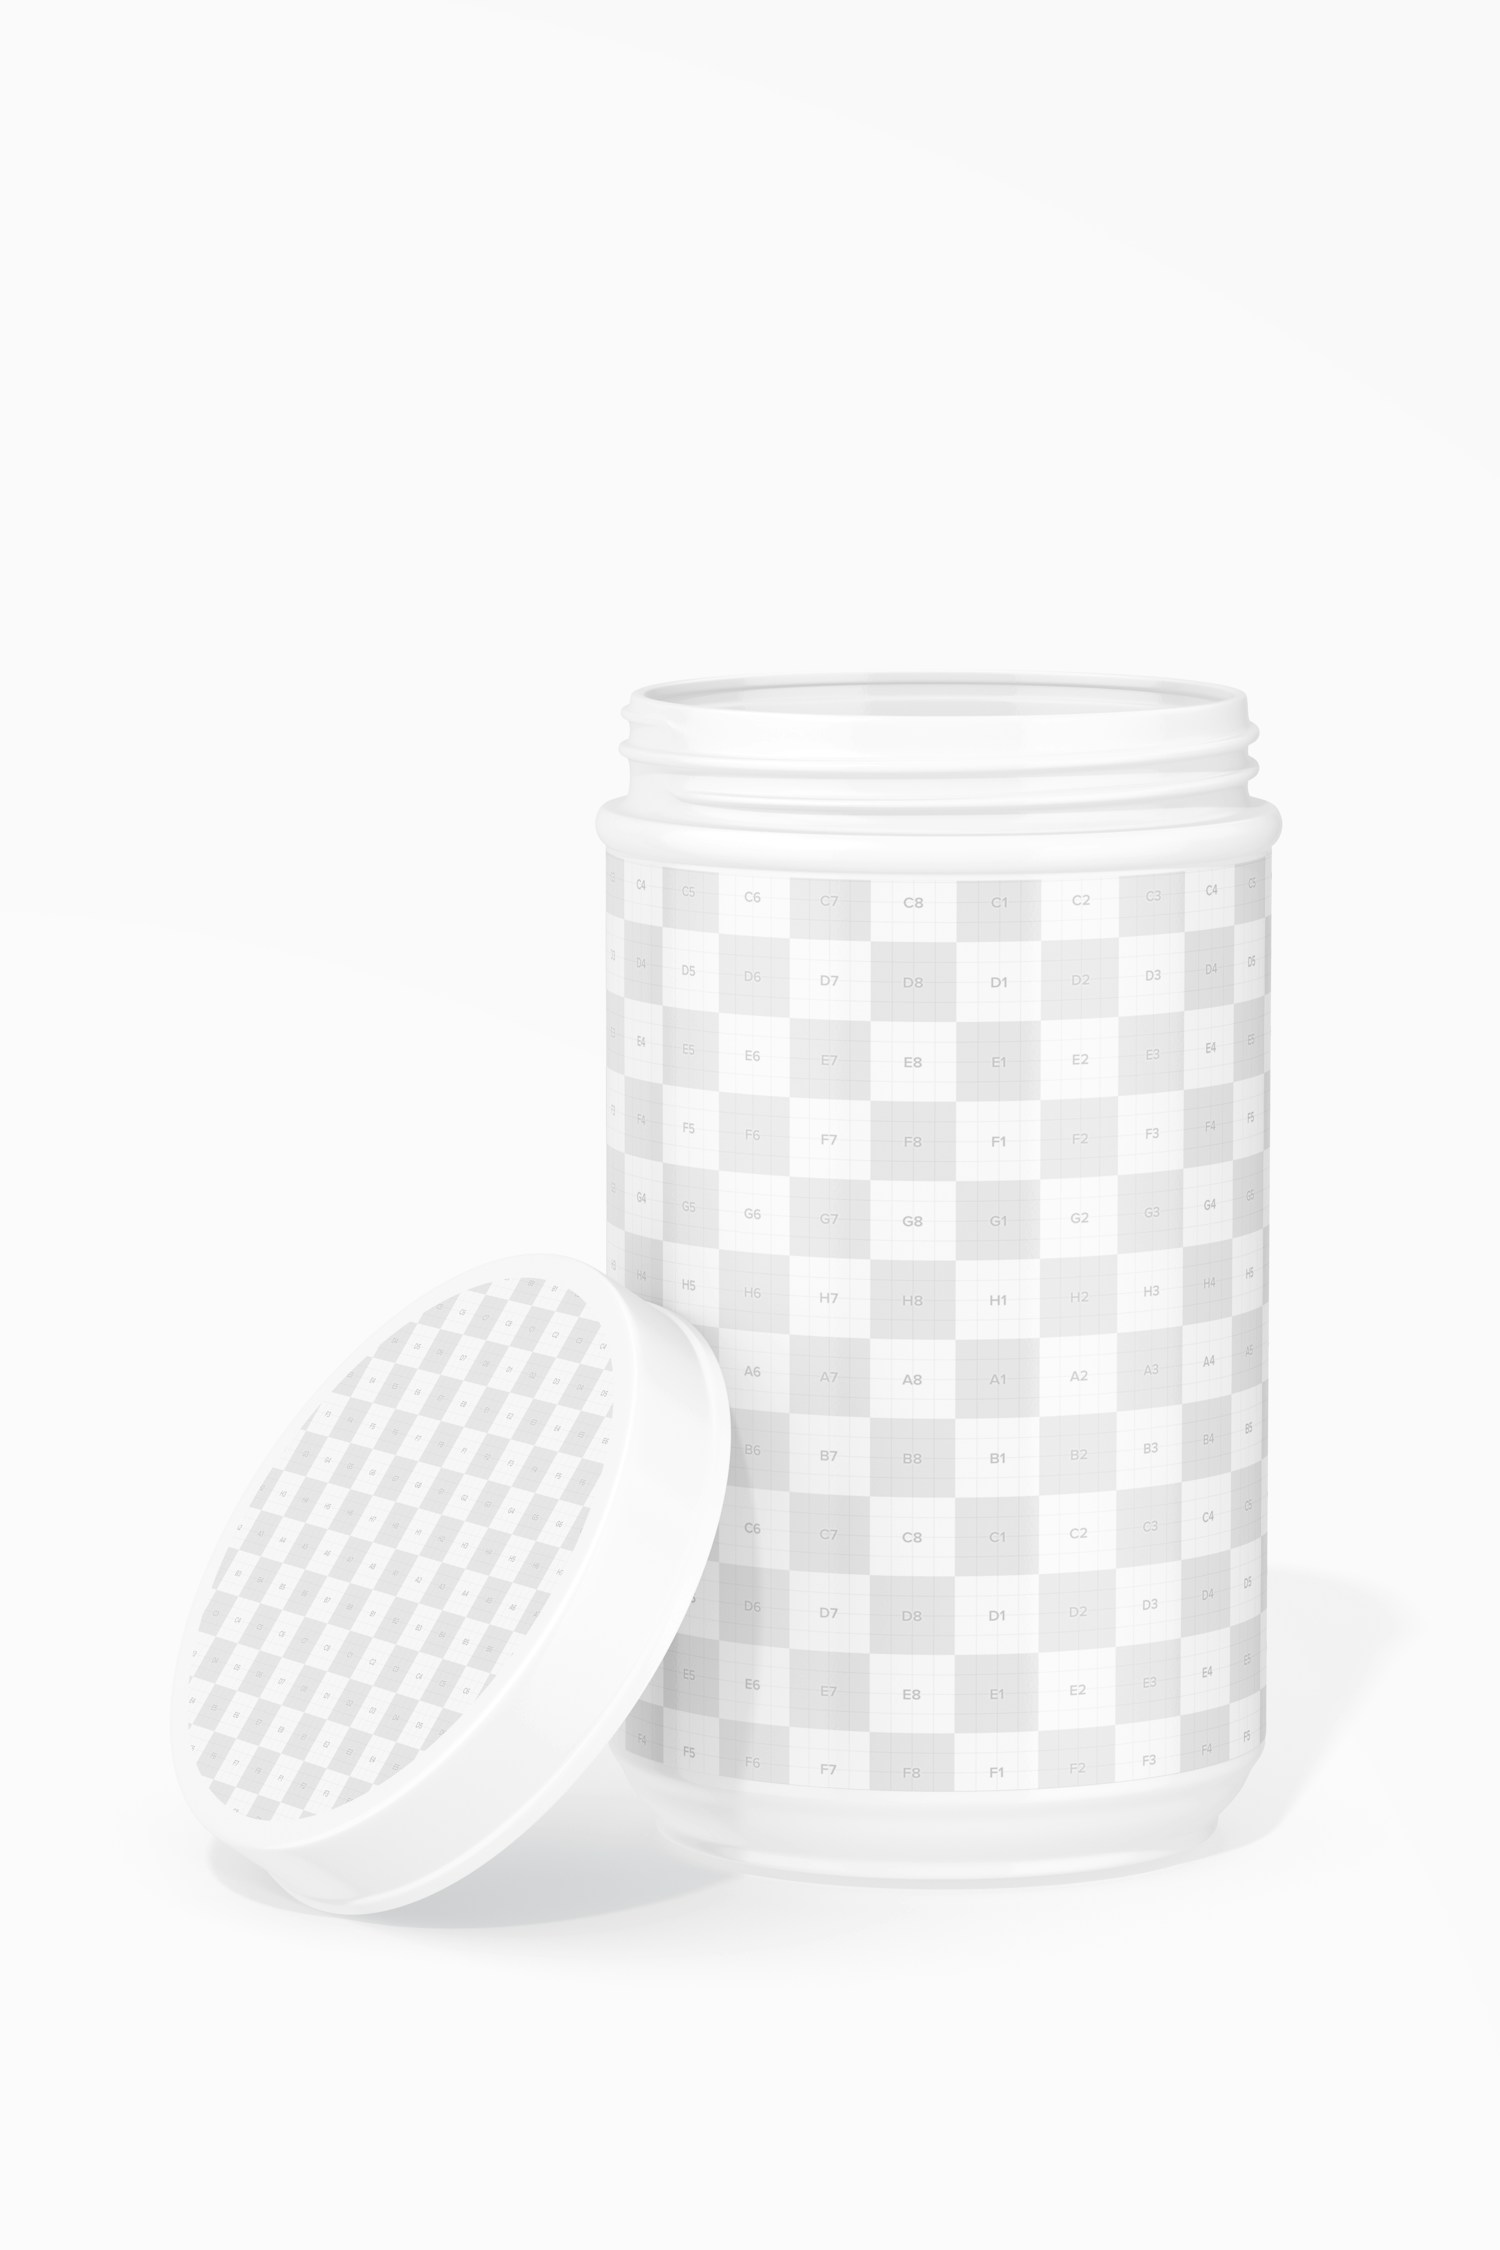 Long Protein Powder Container Mockup